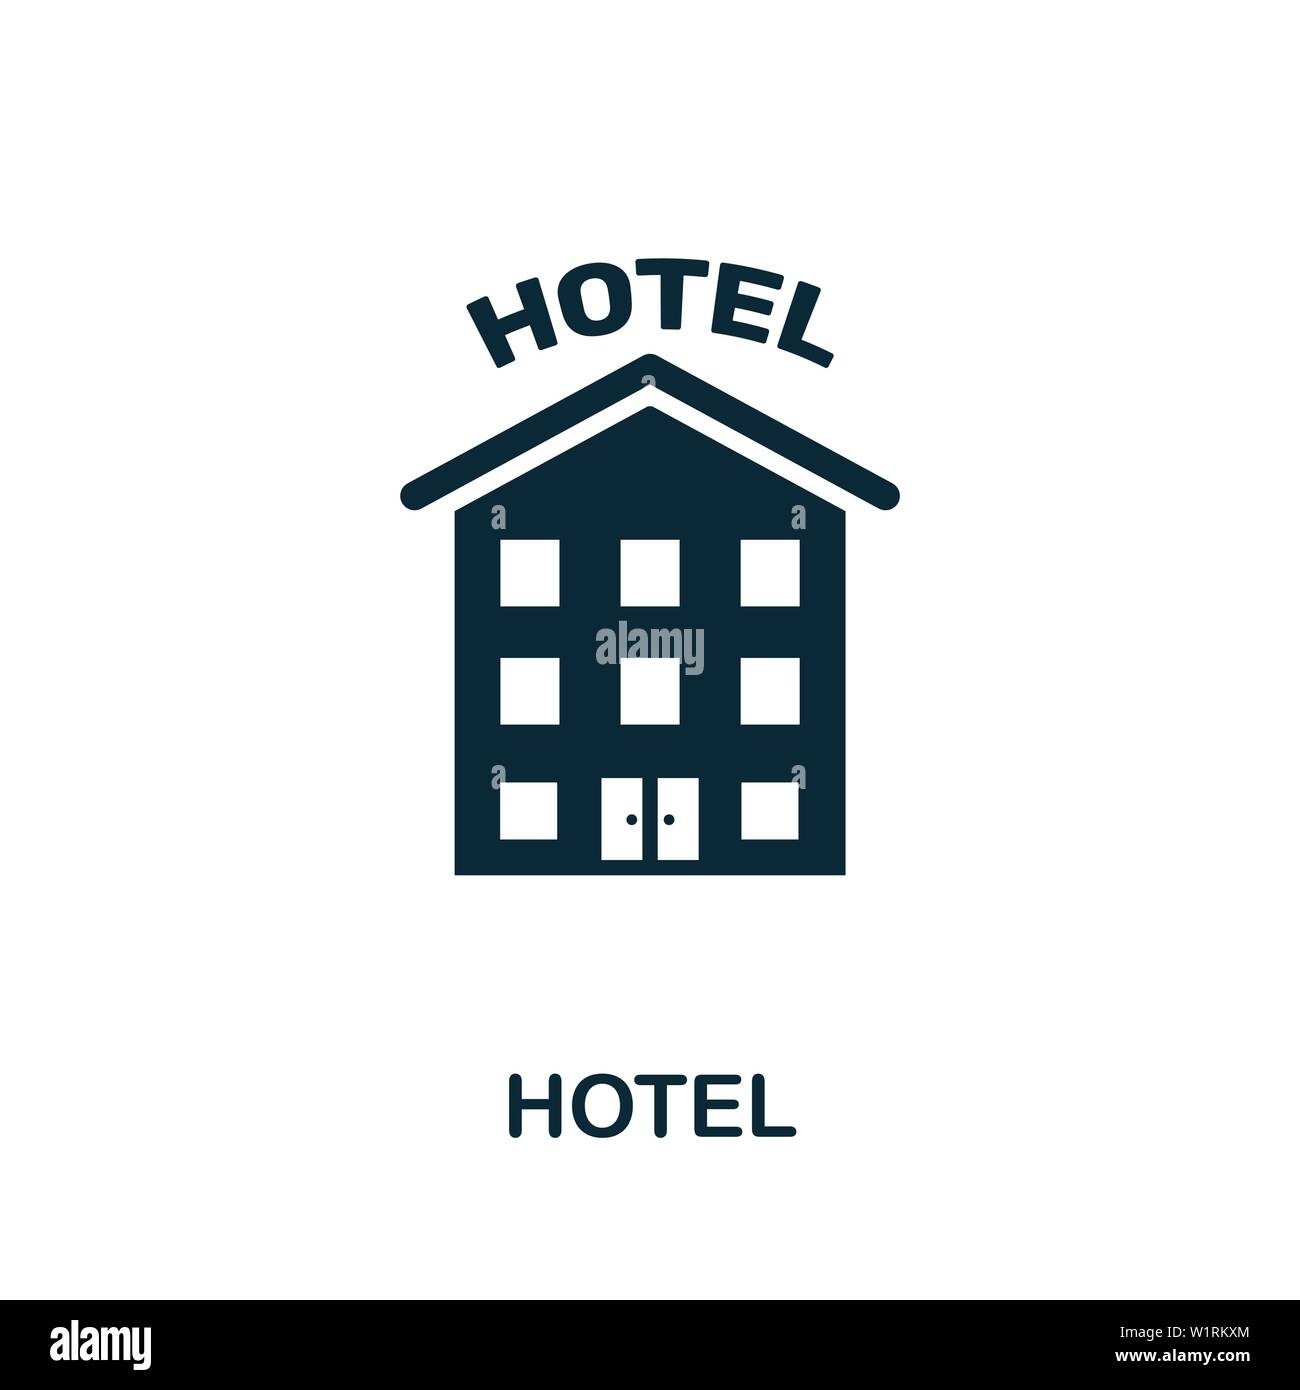 Hotel vector icon illustration. Creative sign from icons ...